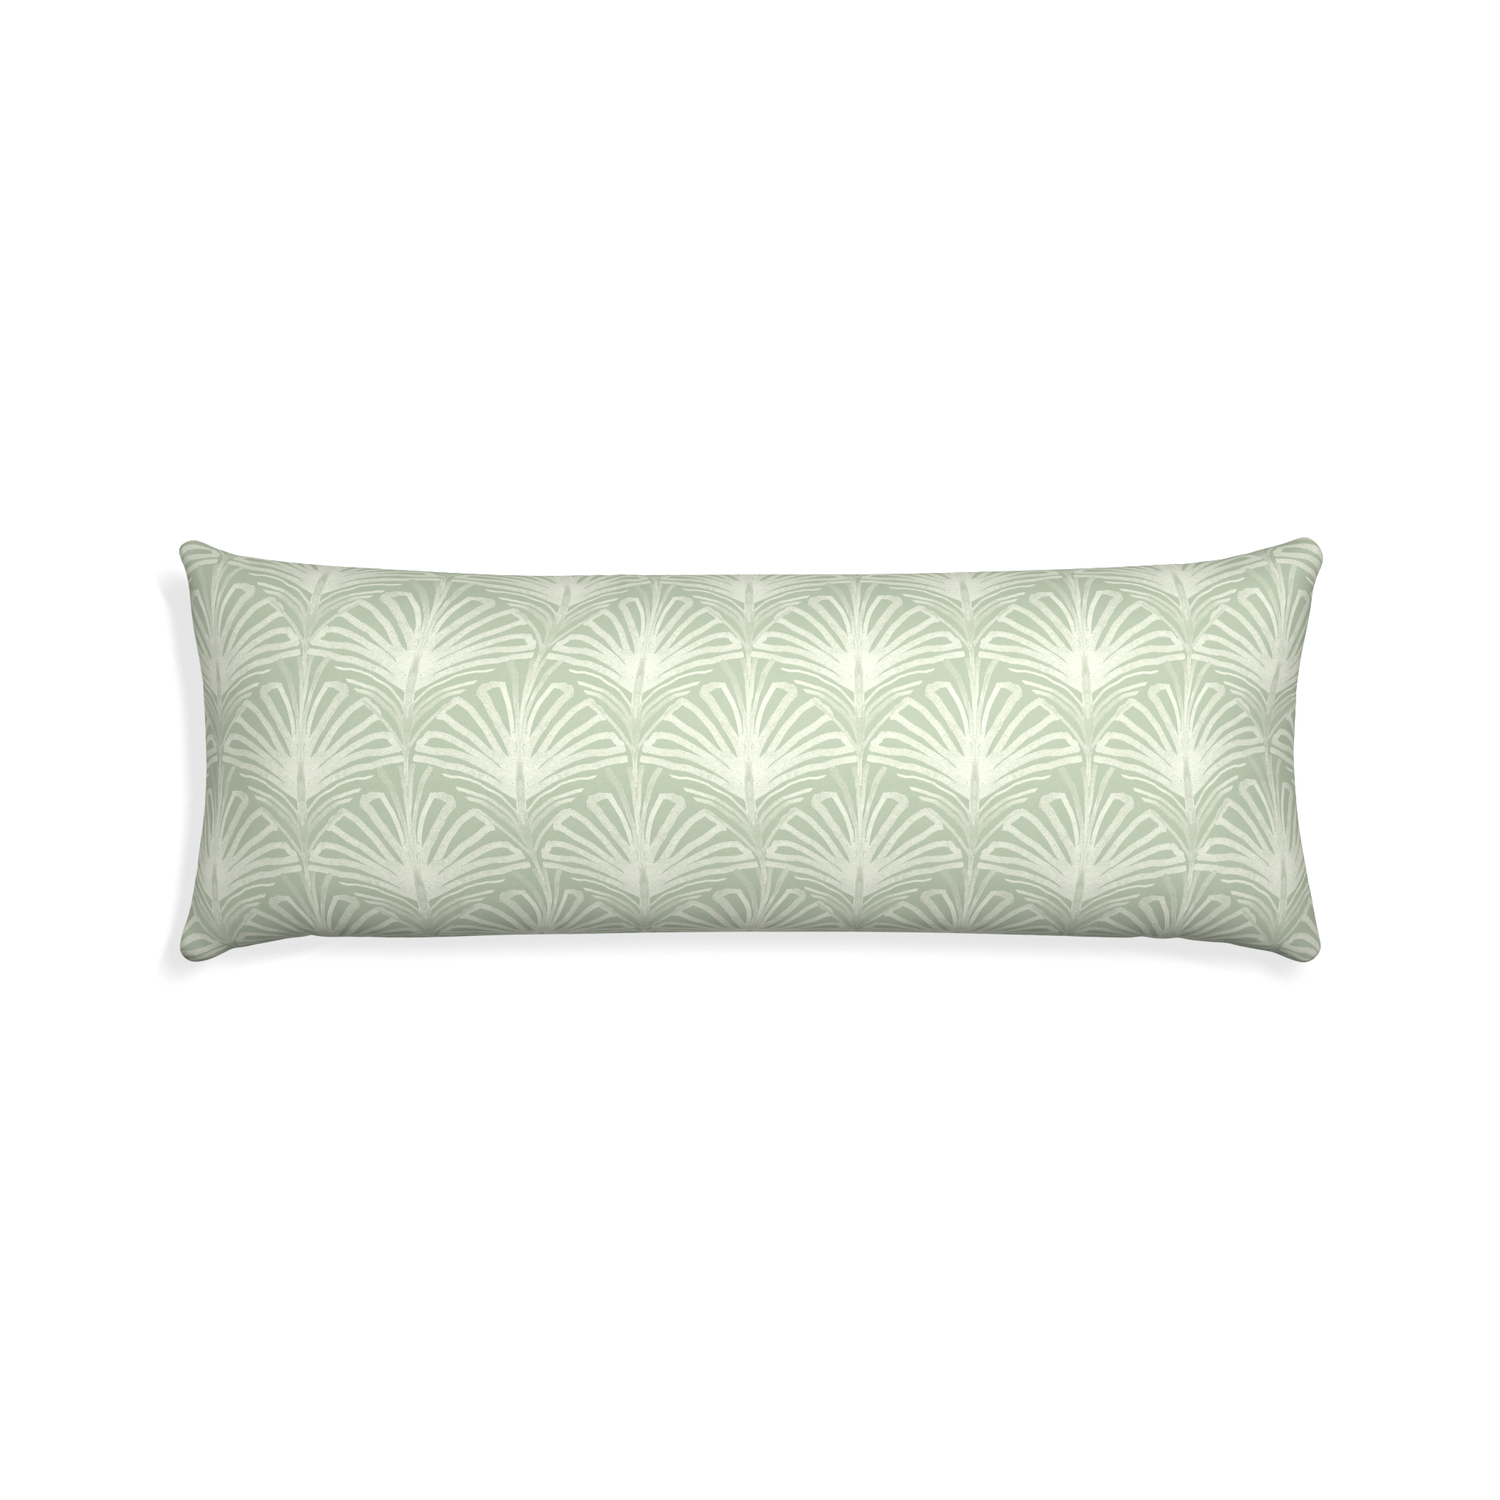 Xl-lumbar suzy sage custom sage green palmpillow with none on white background